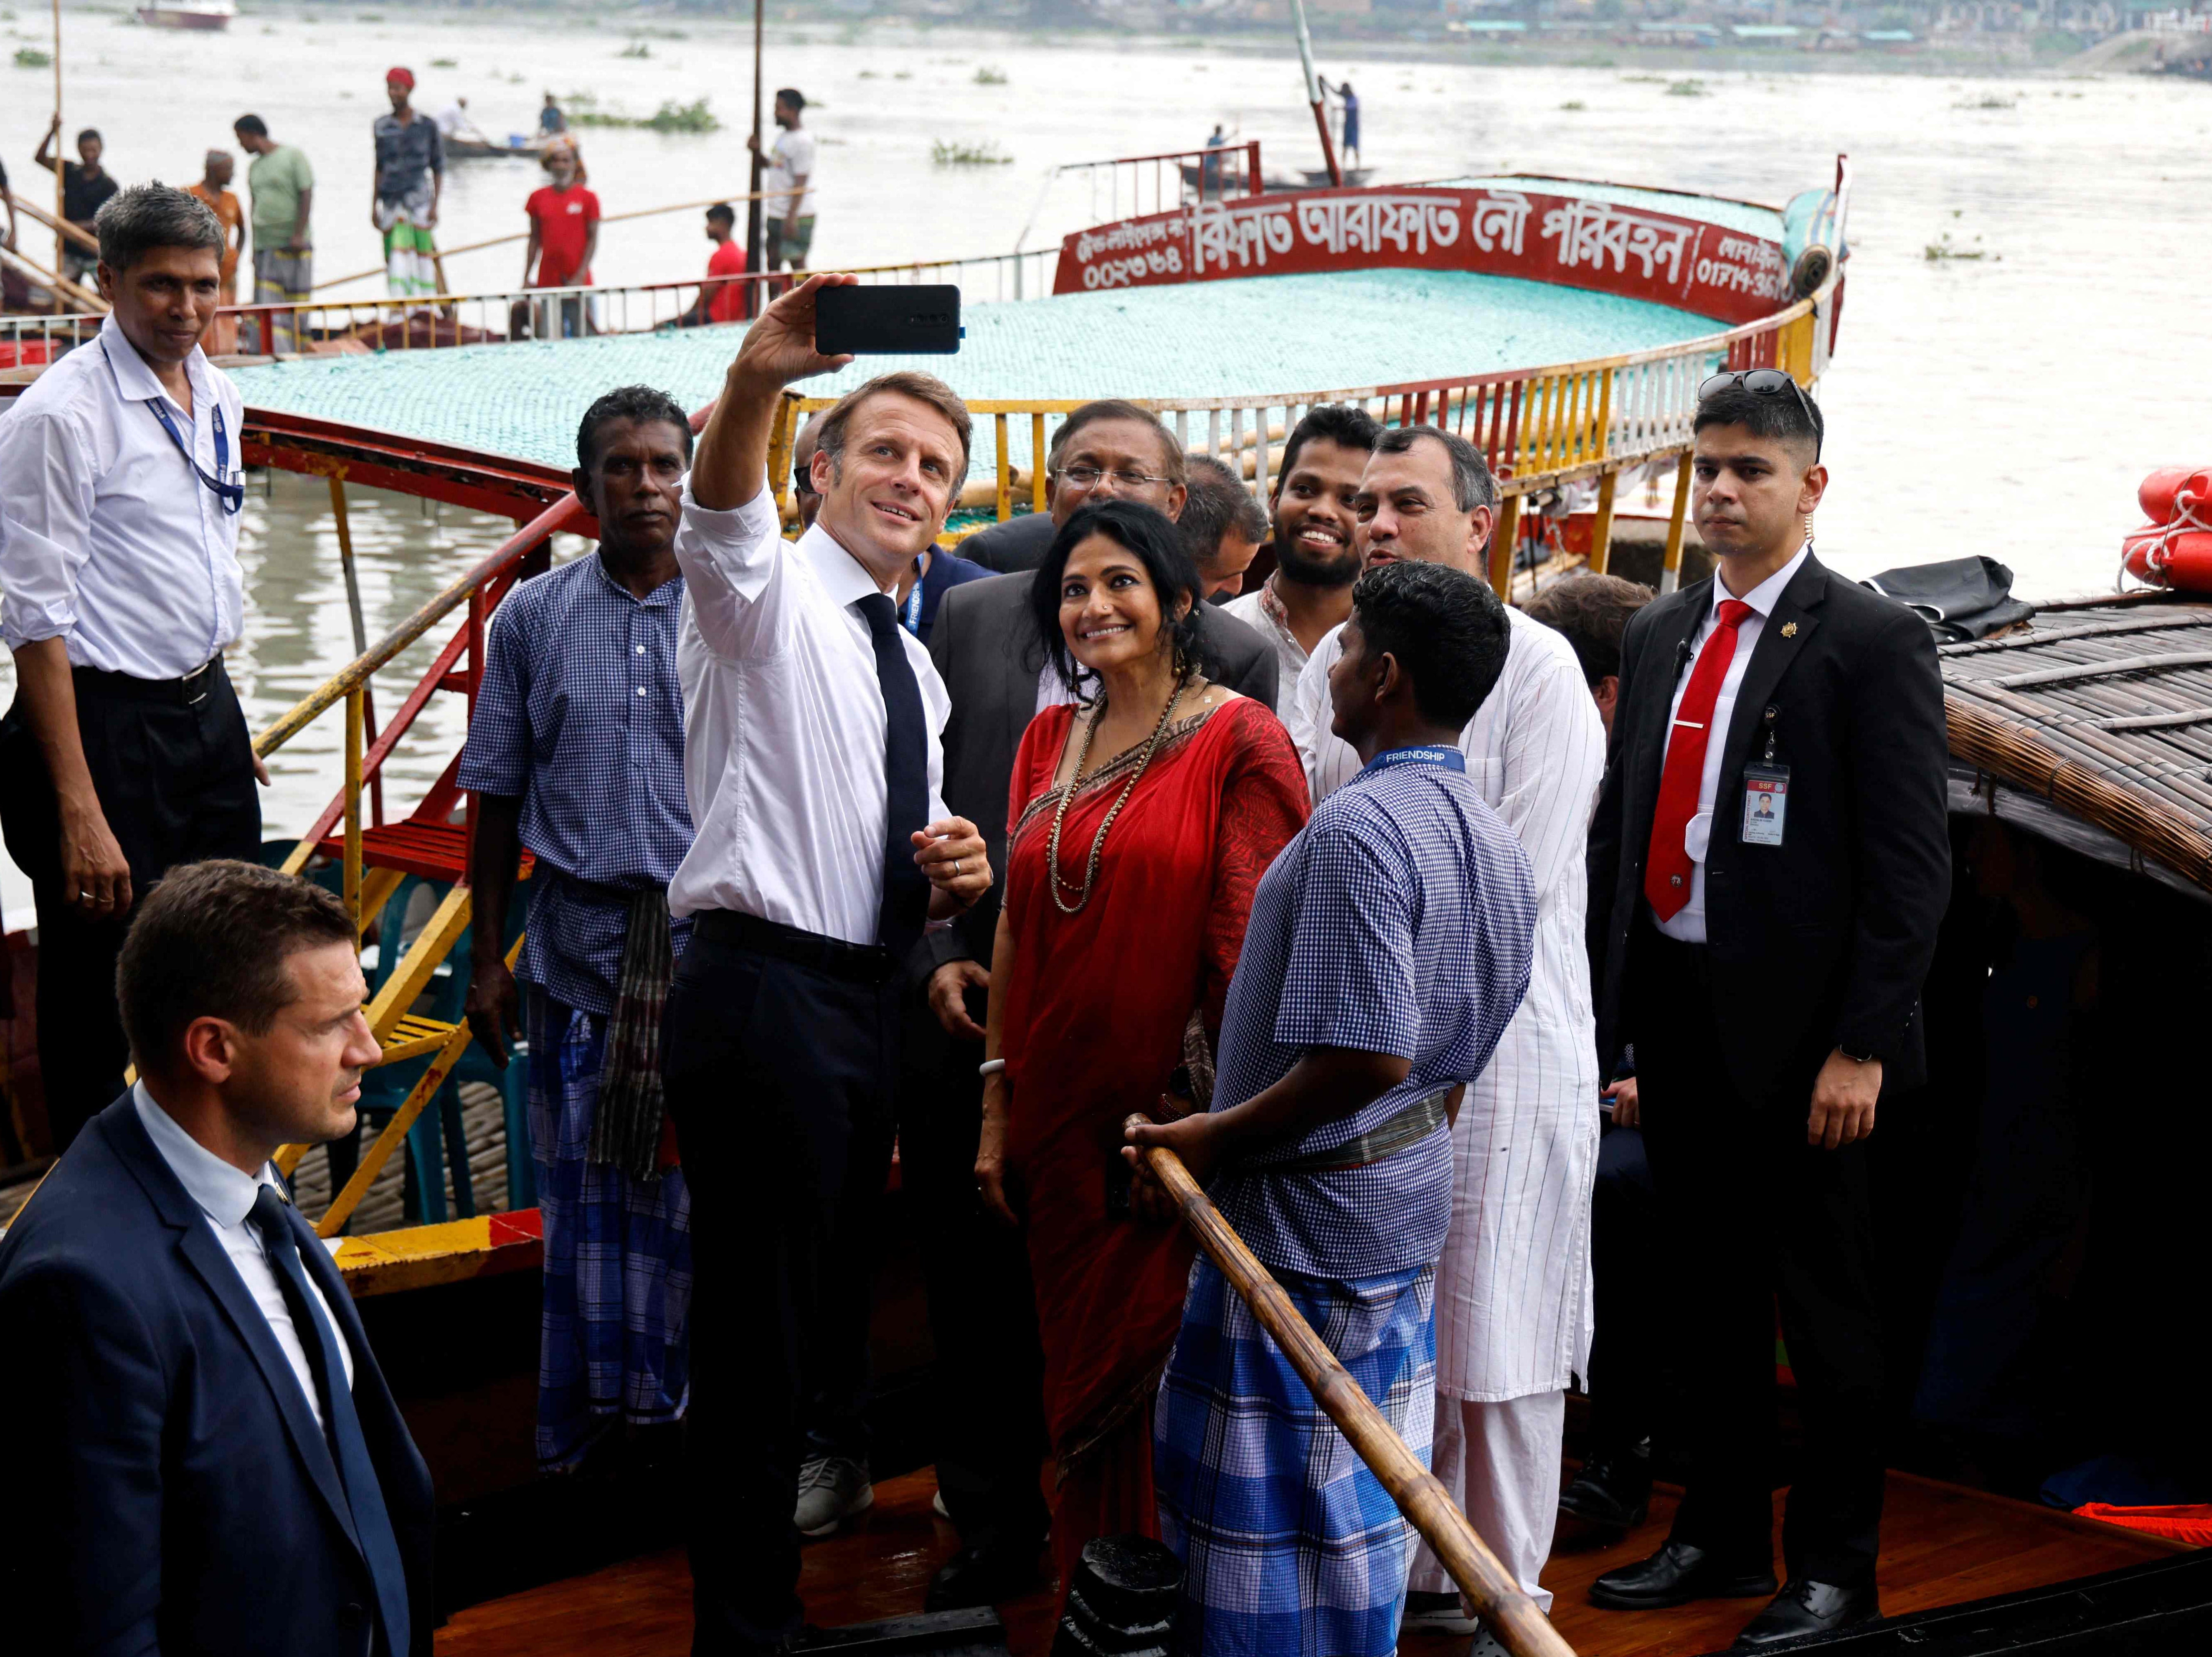 France’s President Emmanuel Macron (C) takes a selfie with Bangladeshi locals and members of an NGO after a boat ride during his two-day visit in Dhaka